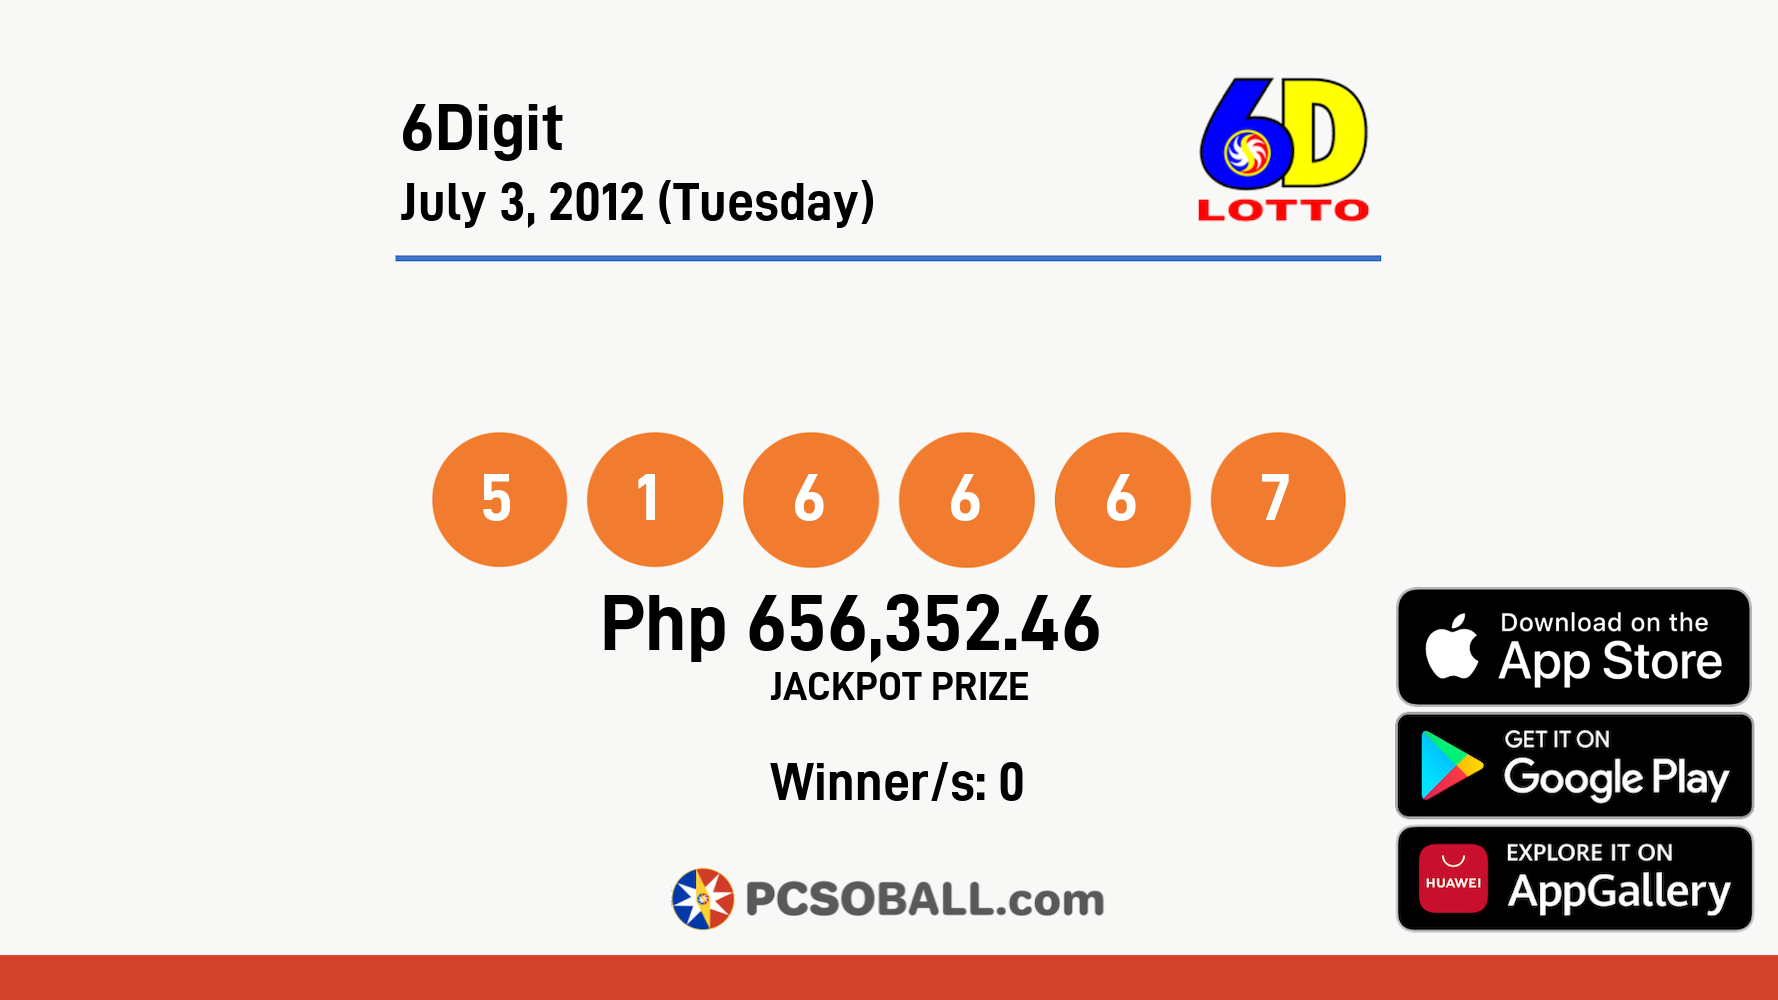 6Digit July 3, 2012 (Tuesday) Result